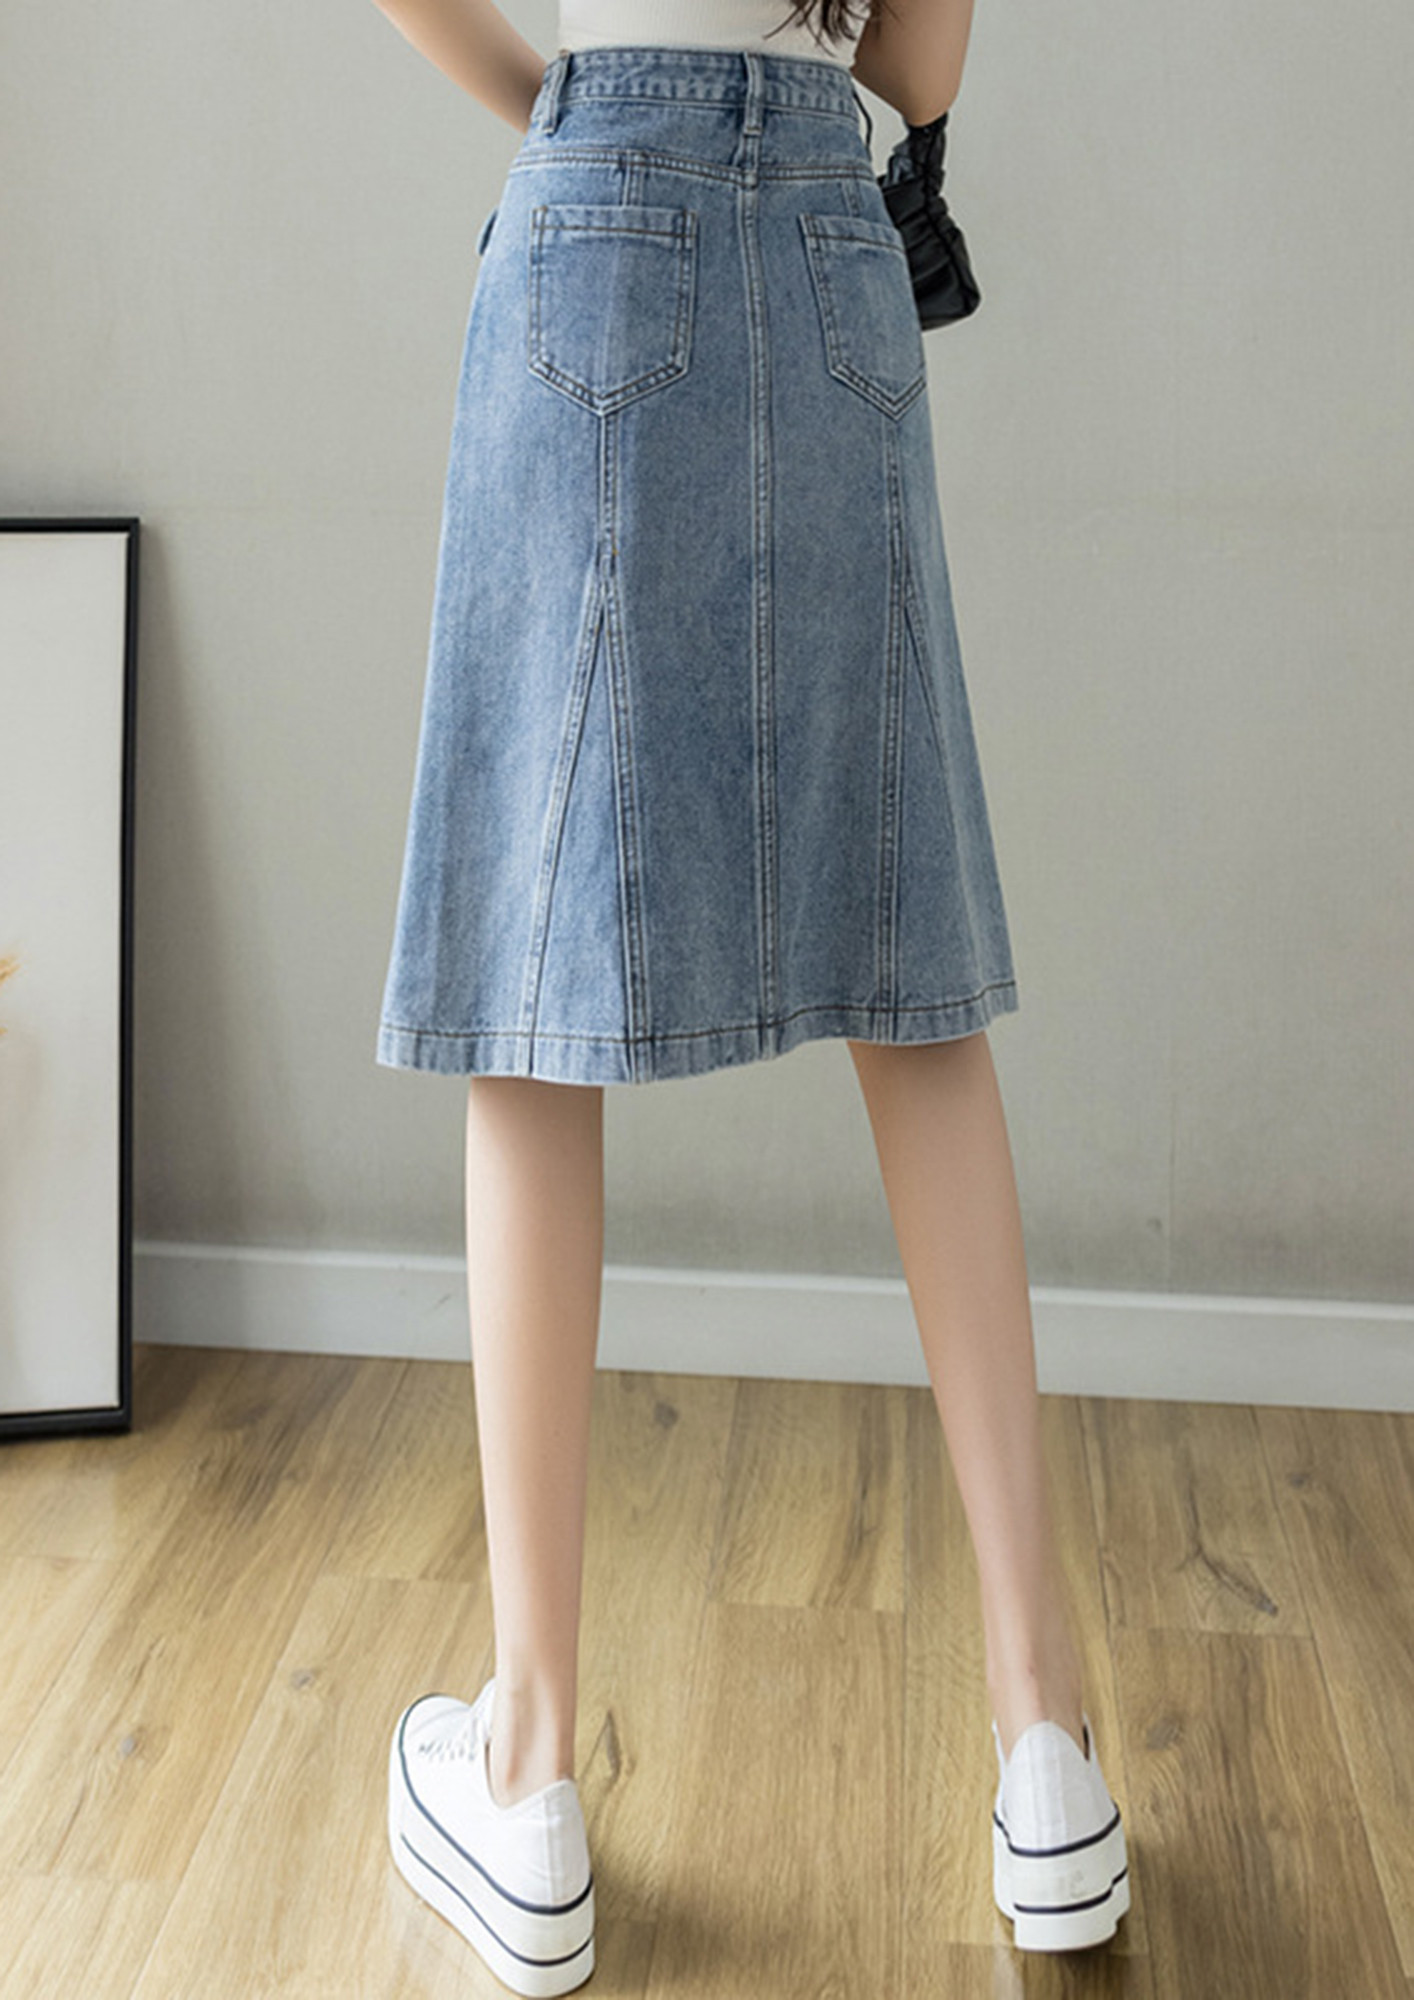 8 Jean Skirt Outfits That Carry Over to Fall Fabulously | Vogue